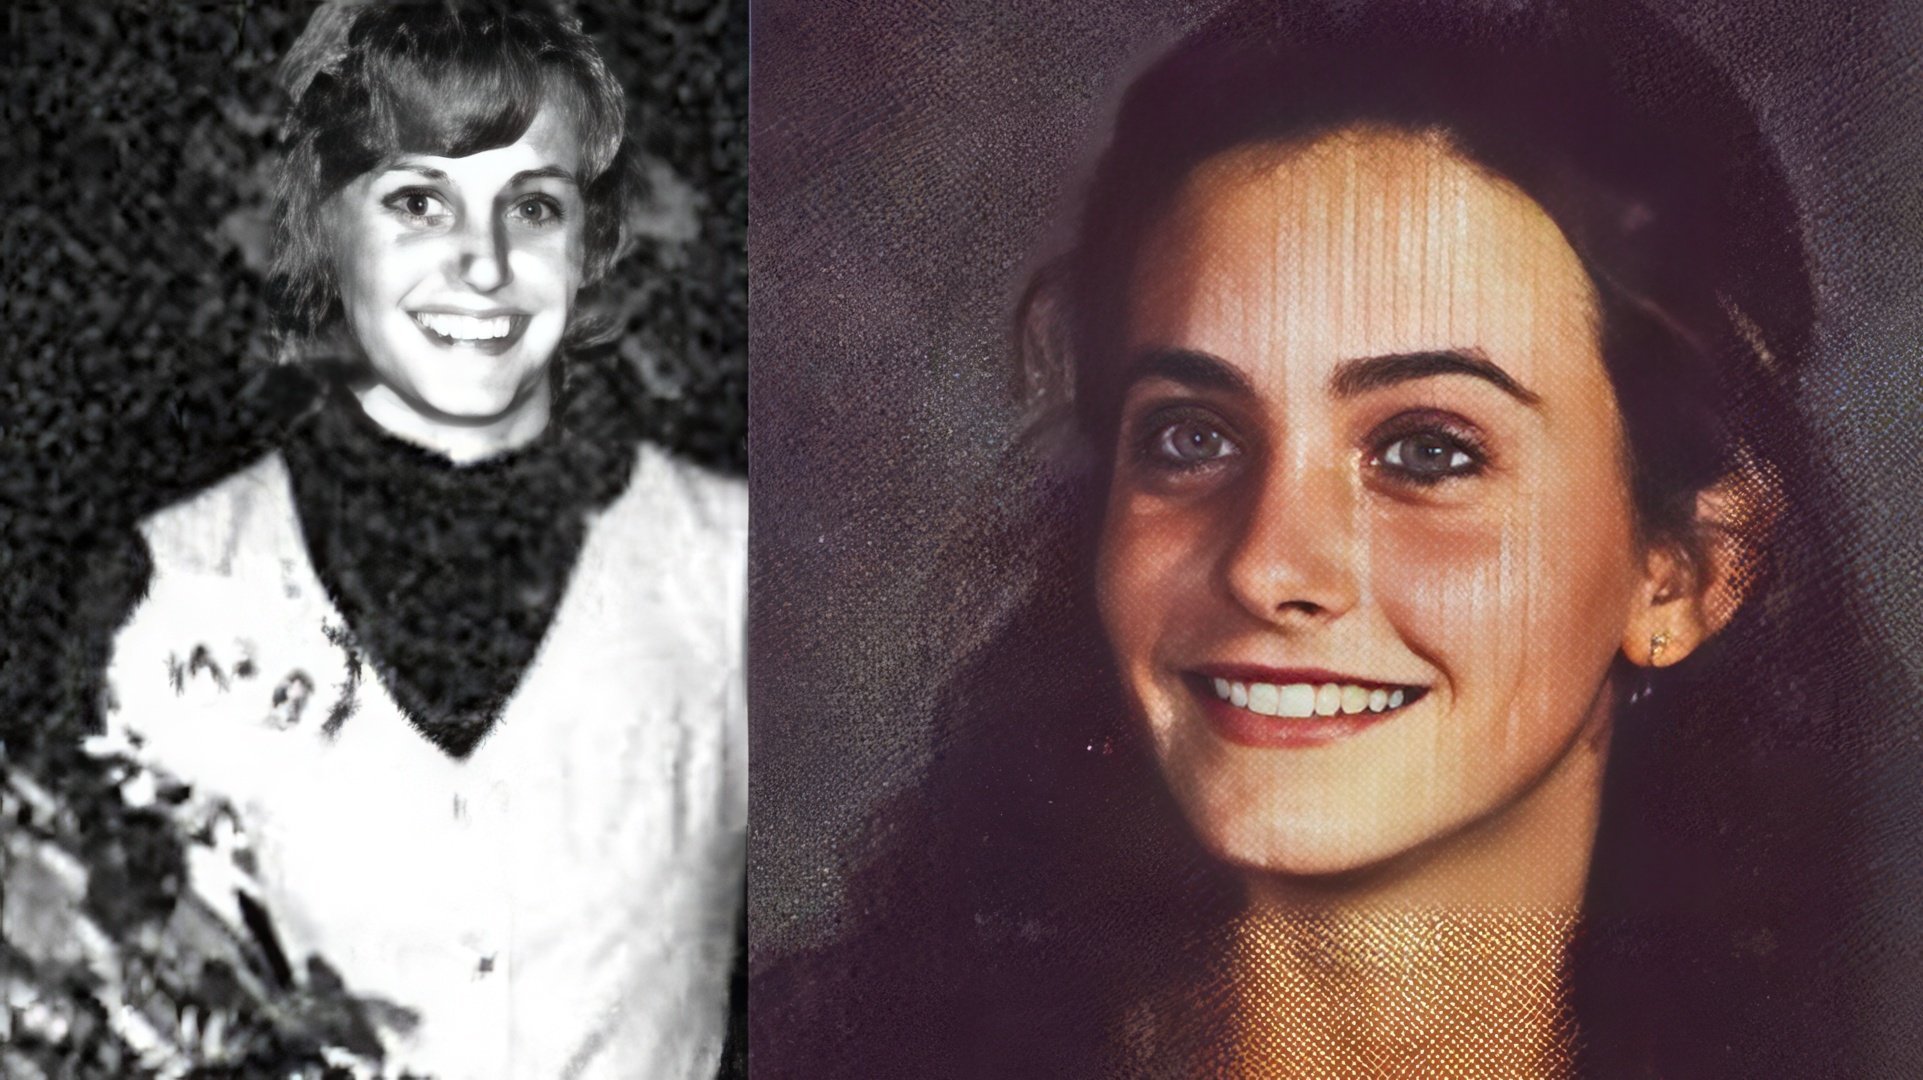 Courtney Cox in her youth